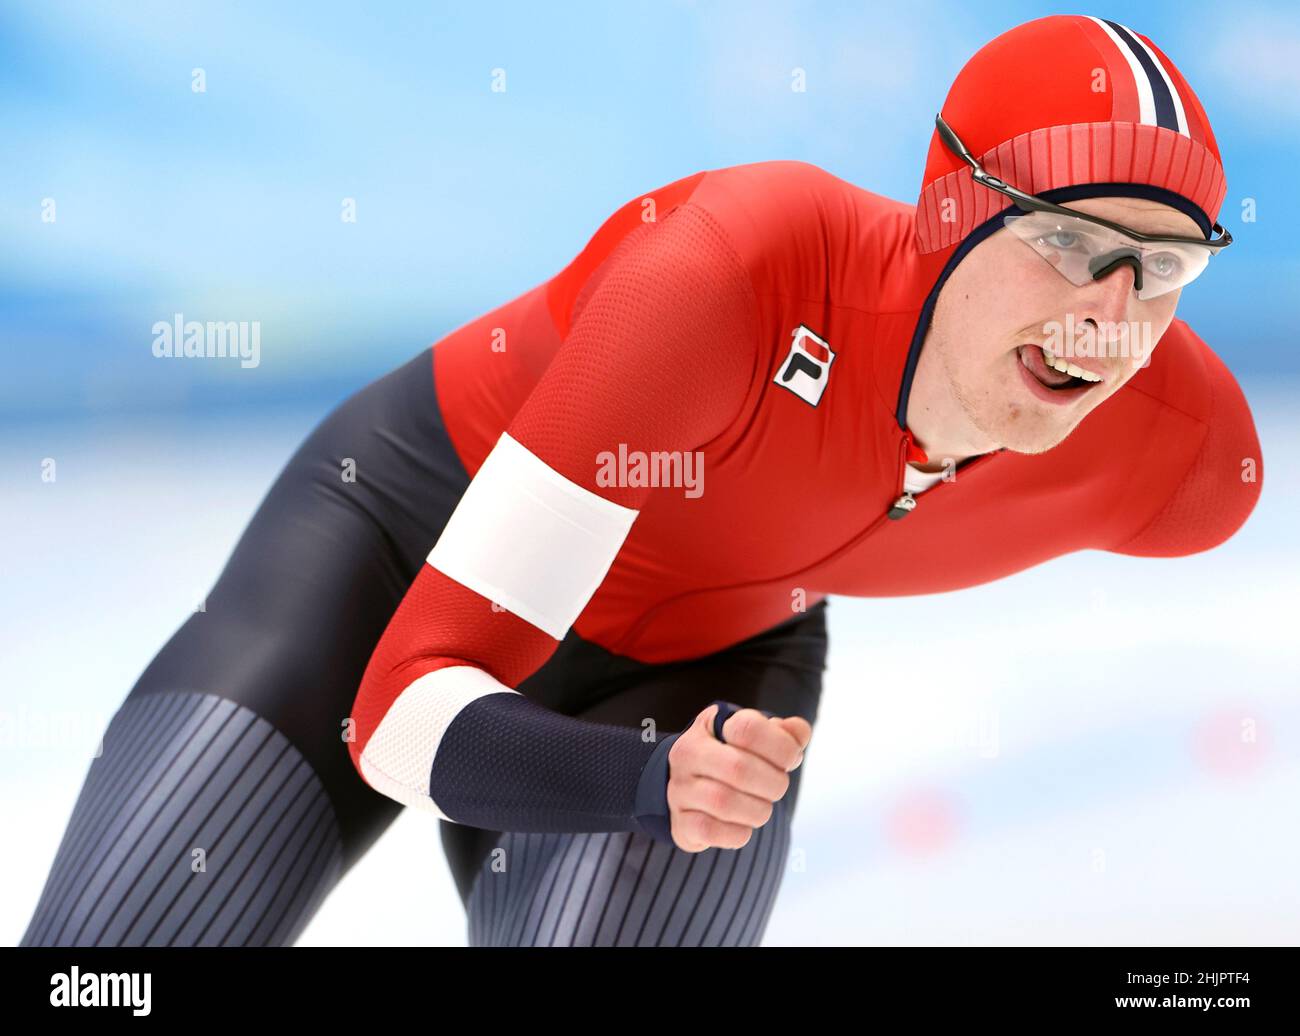 (220131) -- BEIJING, Jan. 31, 2022 (Xinhua) -- Speed skating athlete Hallgeir Engebraaten of Norway participates in the combined training at the National Speed Skating Oval in Beijing, capital of China, Jan. 31, 2022. (Xinhua/Cheng Tingting) Stock Photo